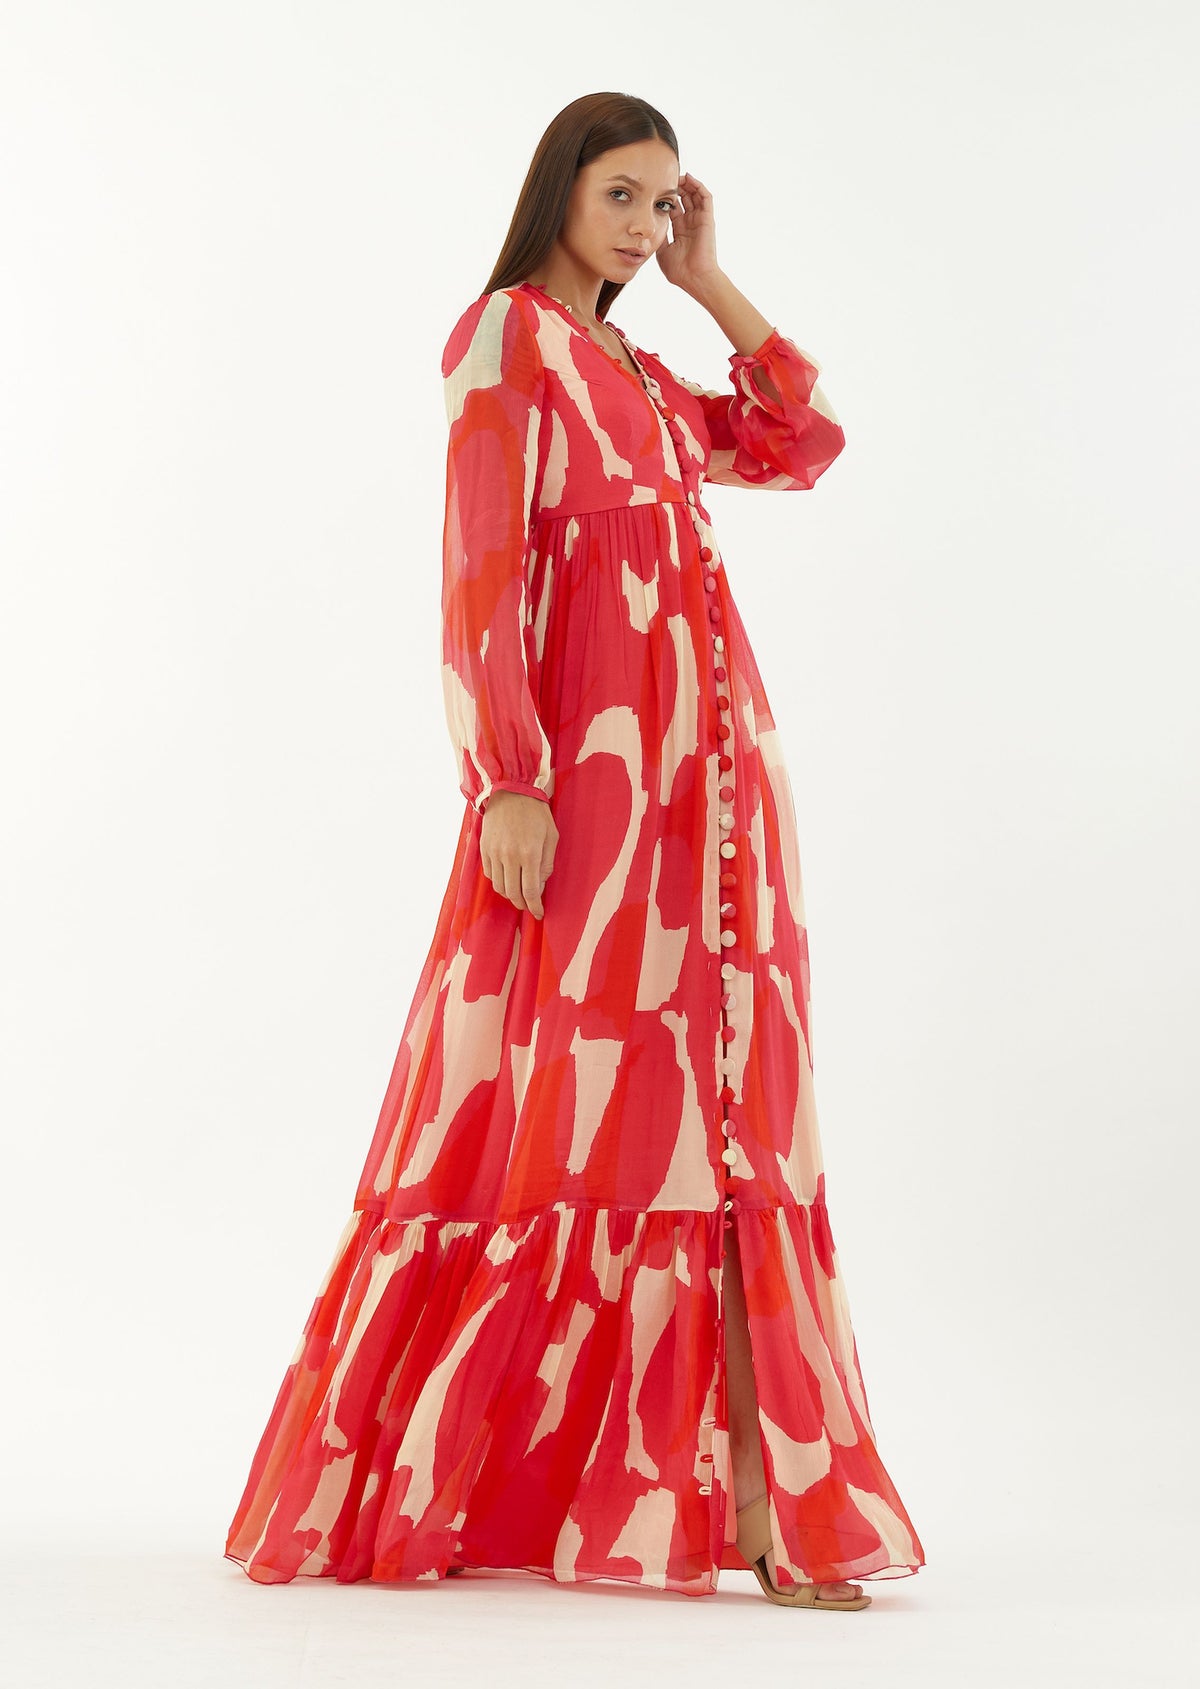 HOT PINK, RED AND BEIGE ABSTRACT LONG DRESS